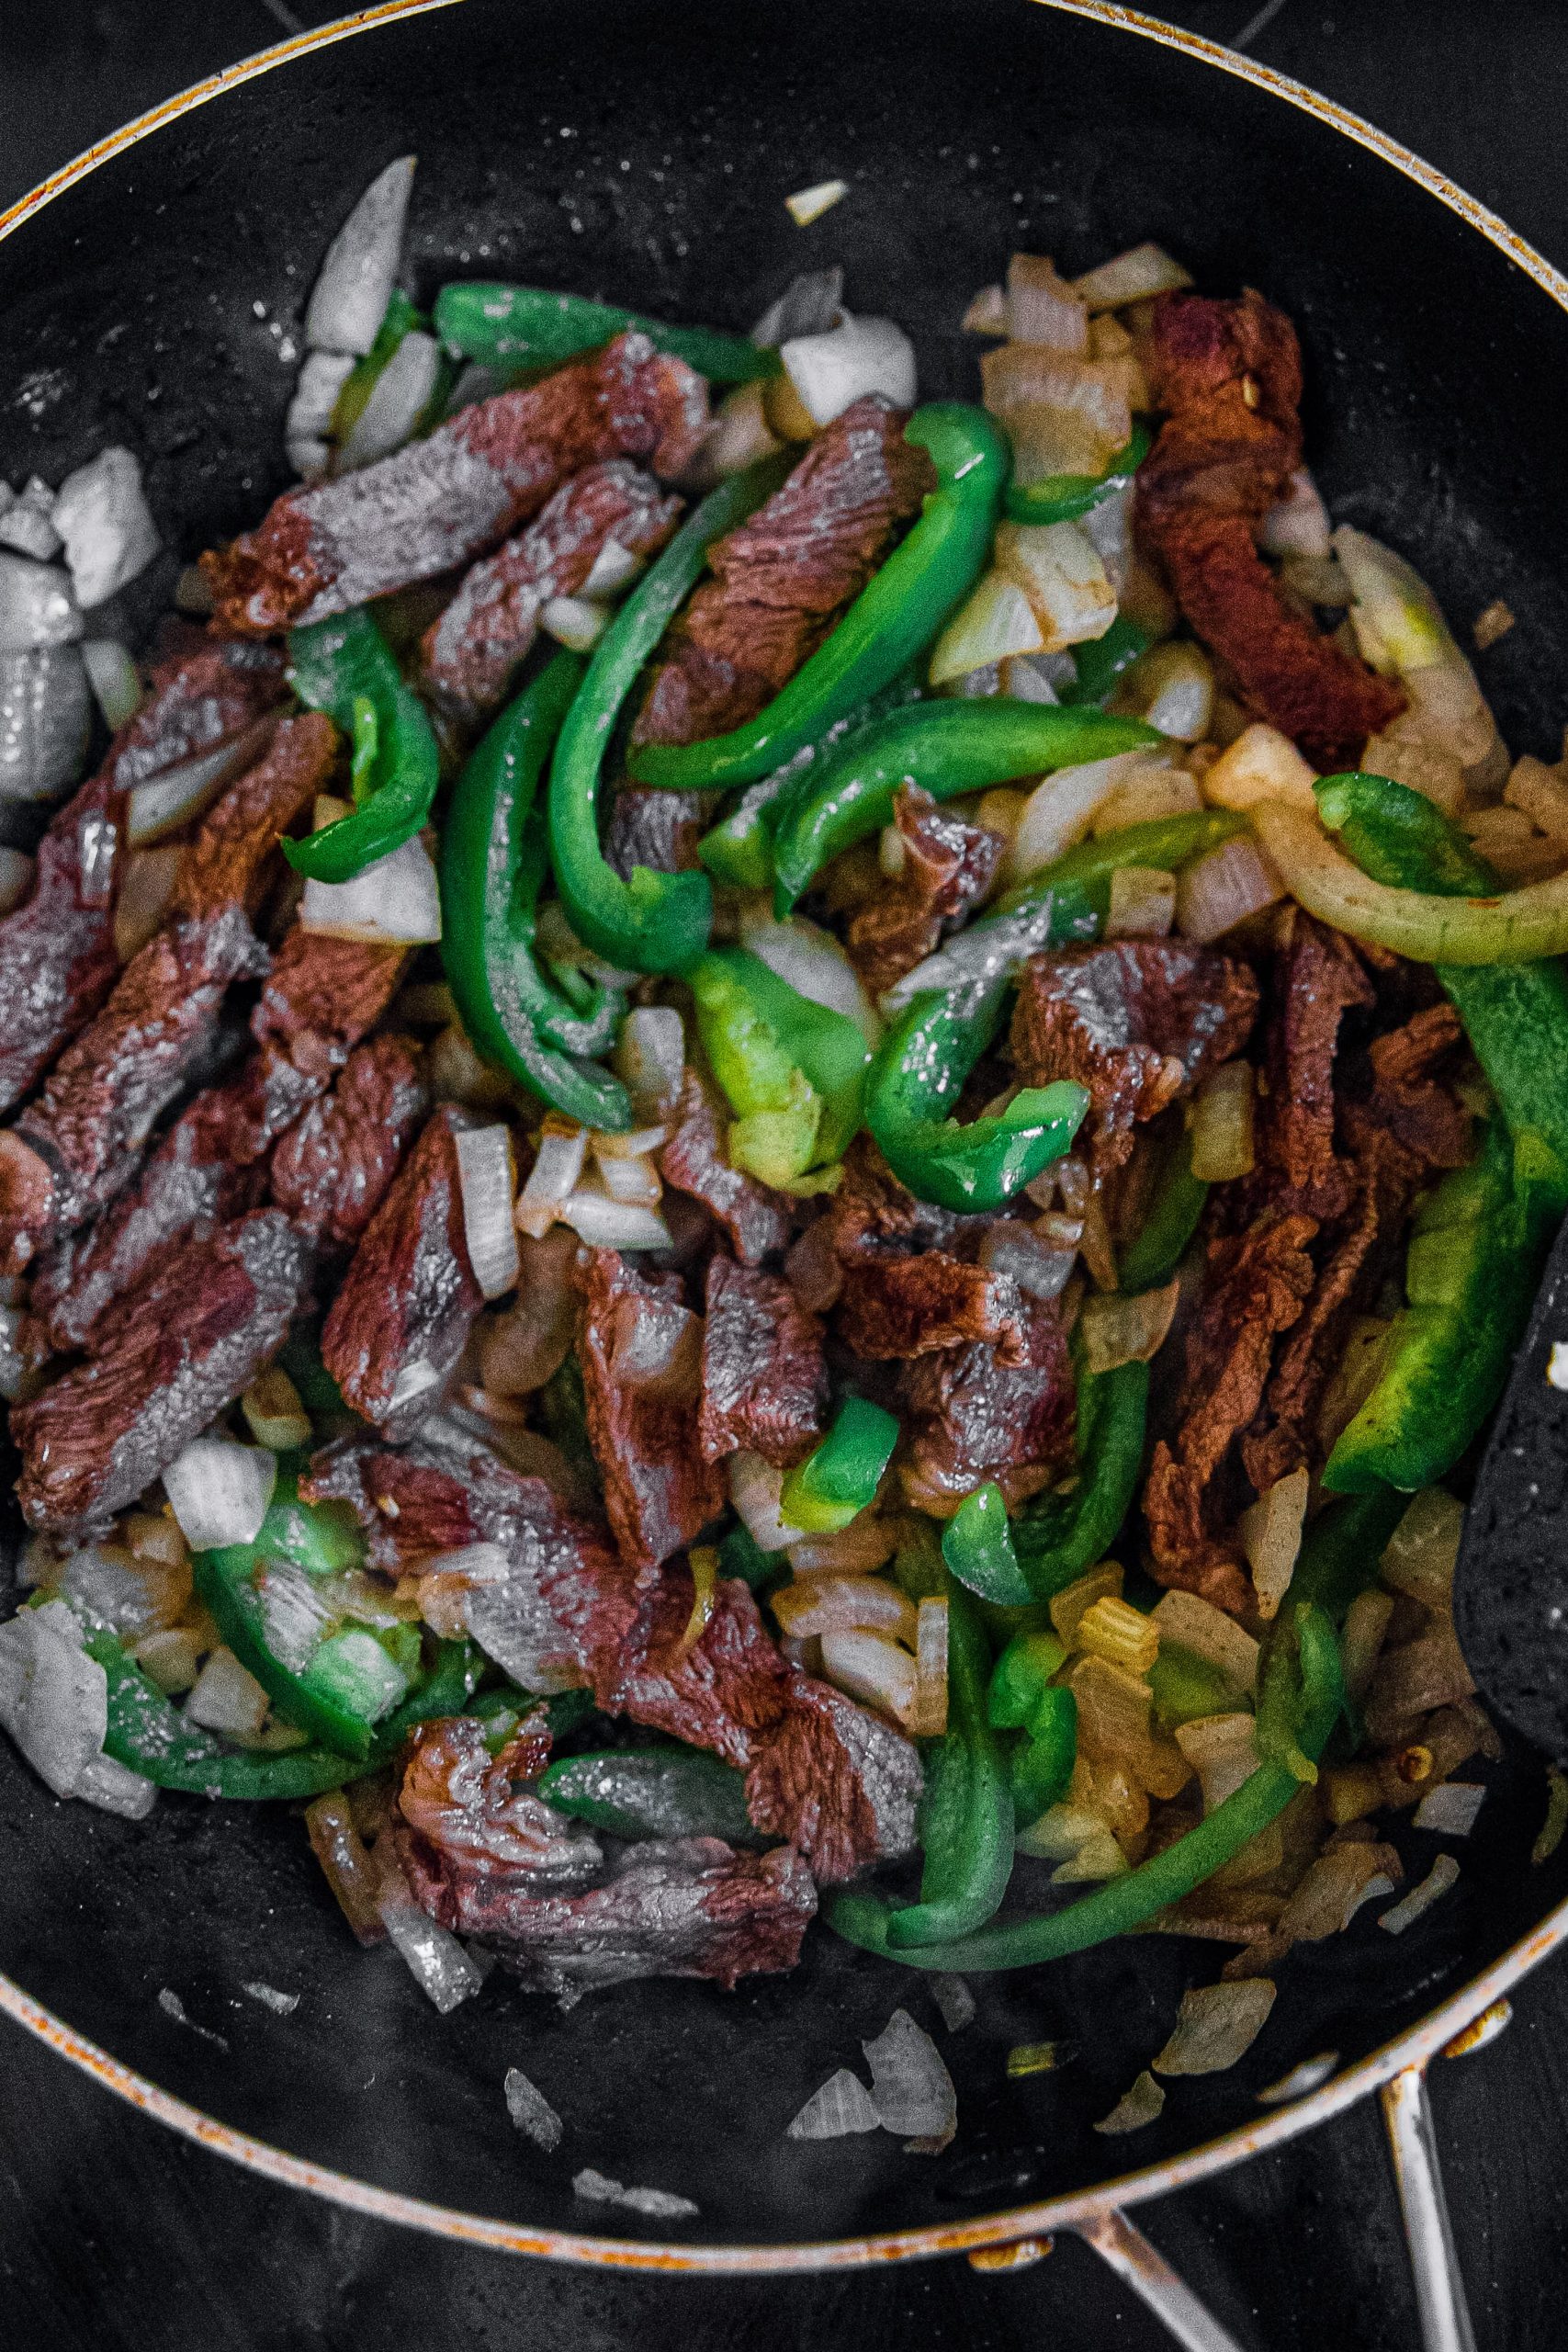 Add onions and green bell peppers to beef; cook and stir until softened, 5 to 10 minutes.